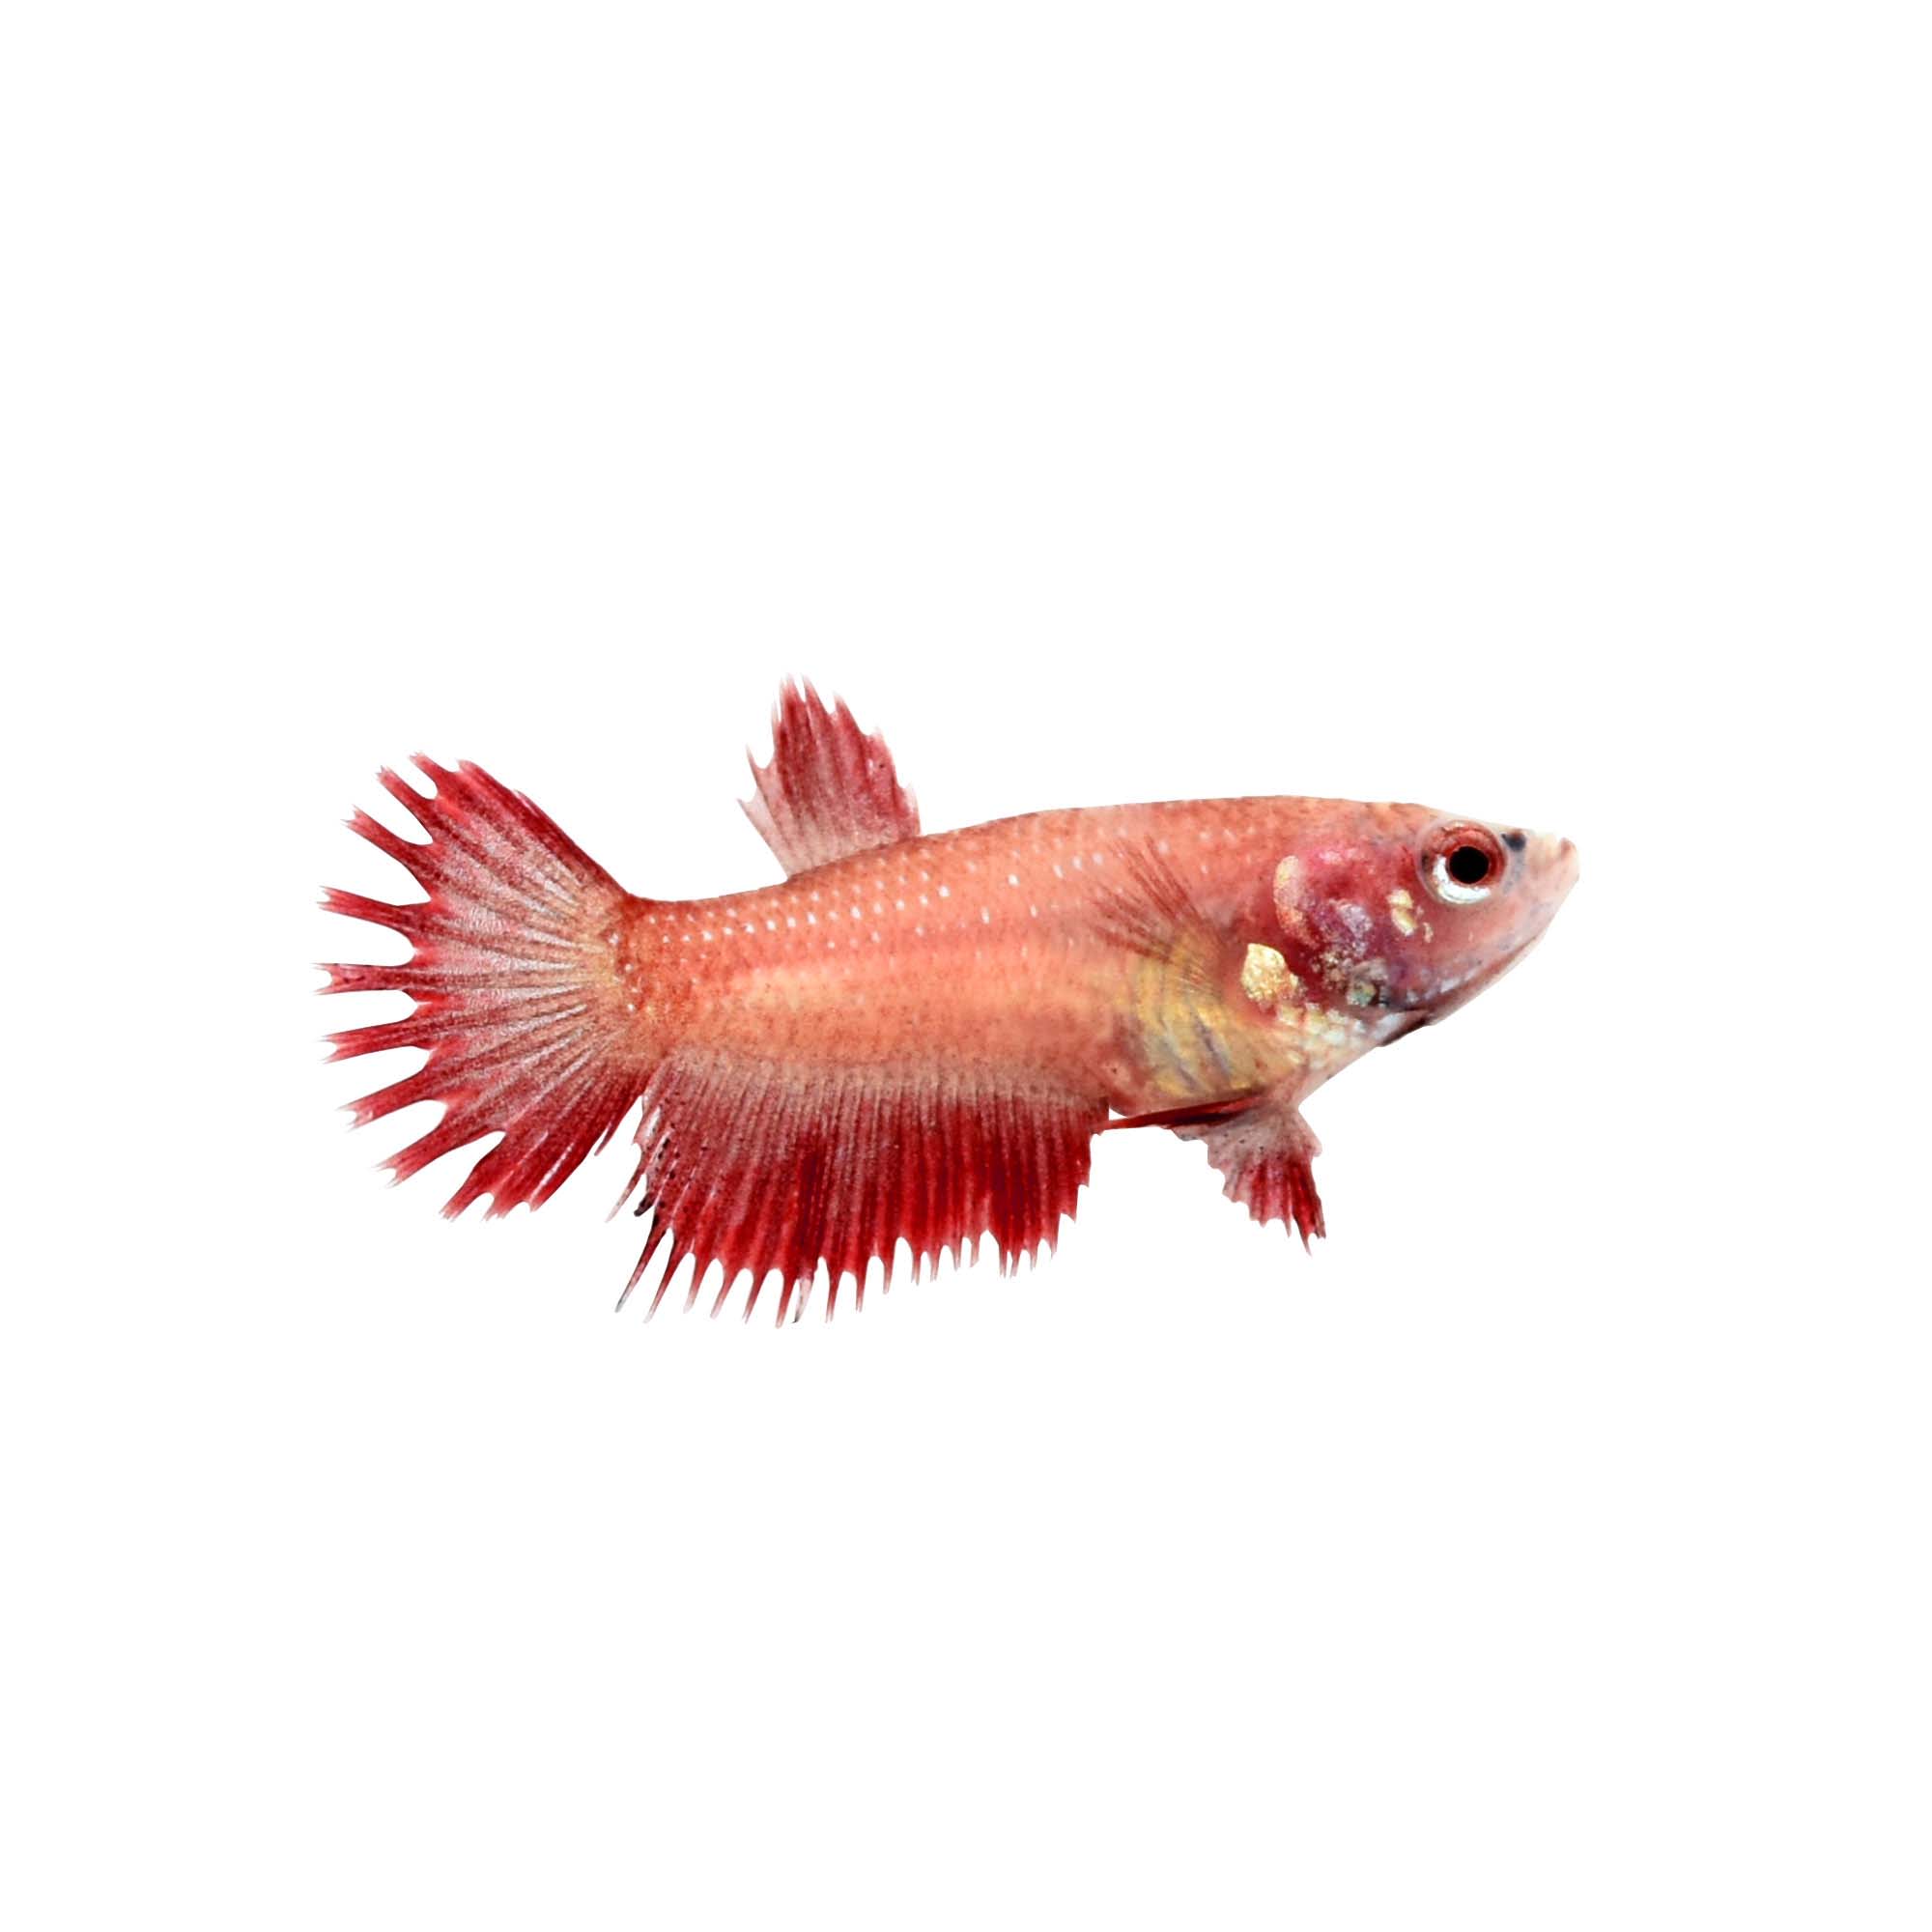 Red Female Crowntail Betta Fish for 